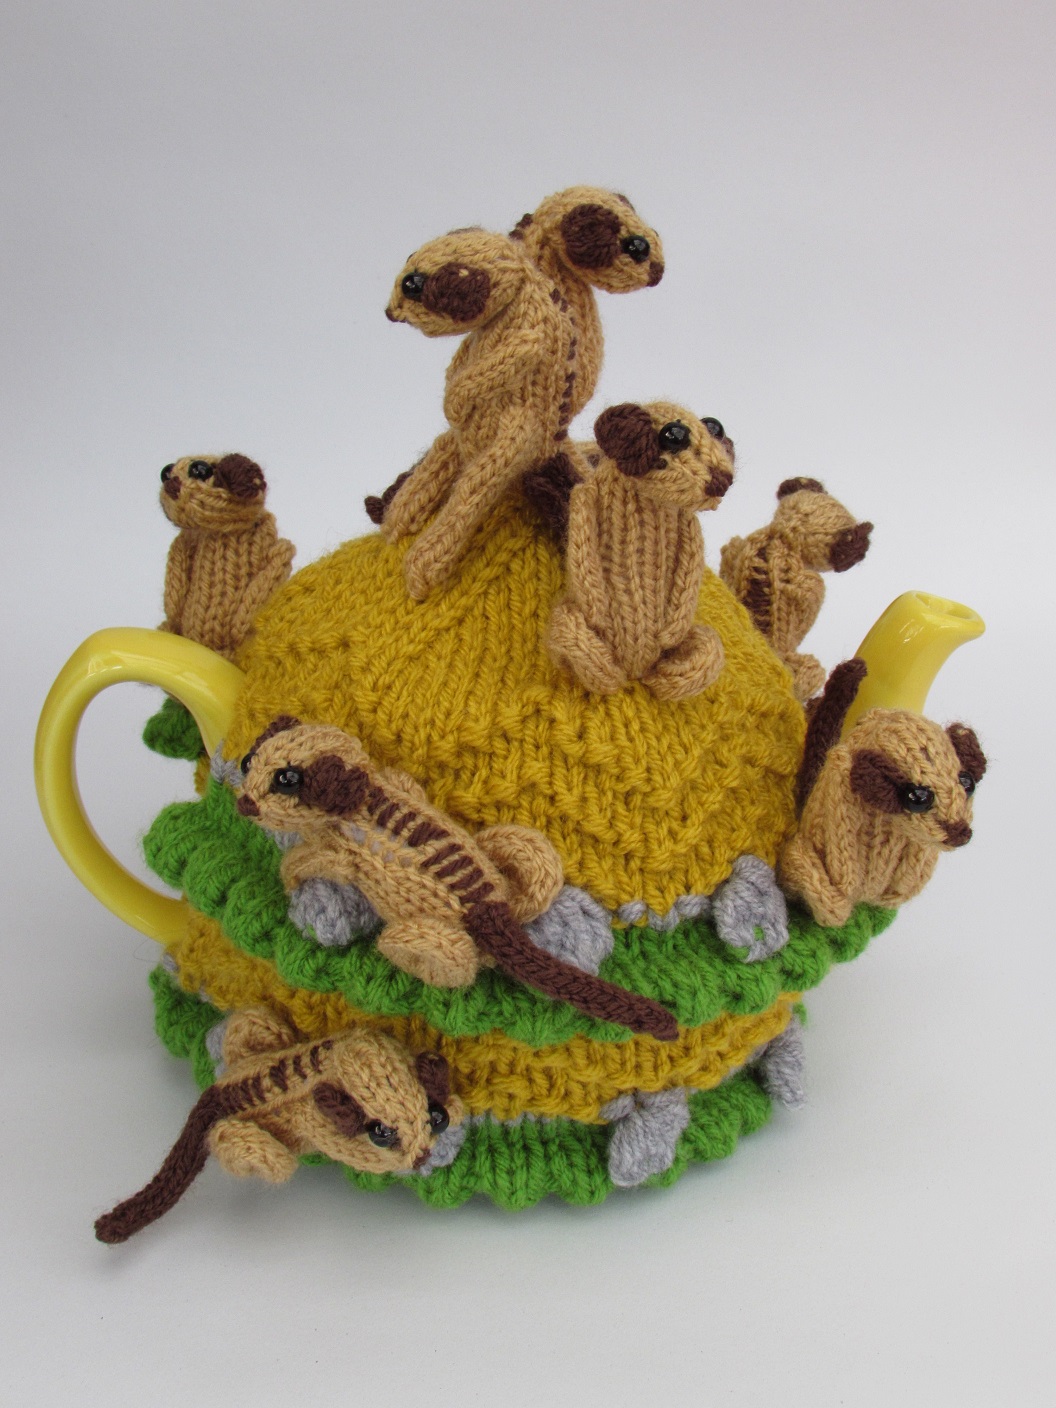 Animal Tea Cosy and Knitting Patterns